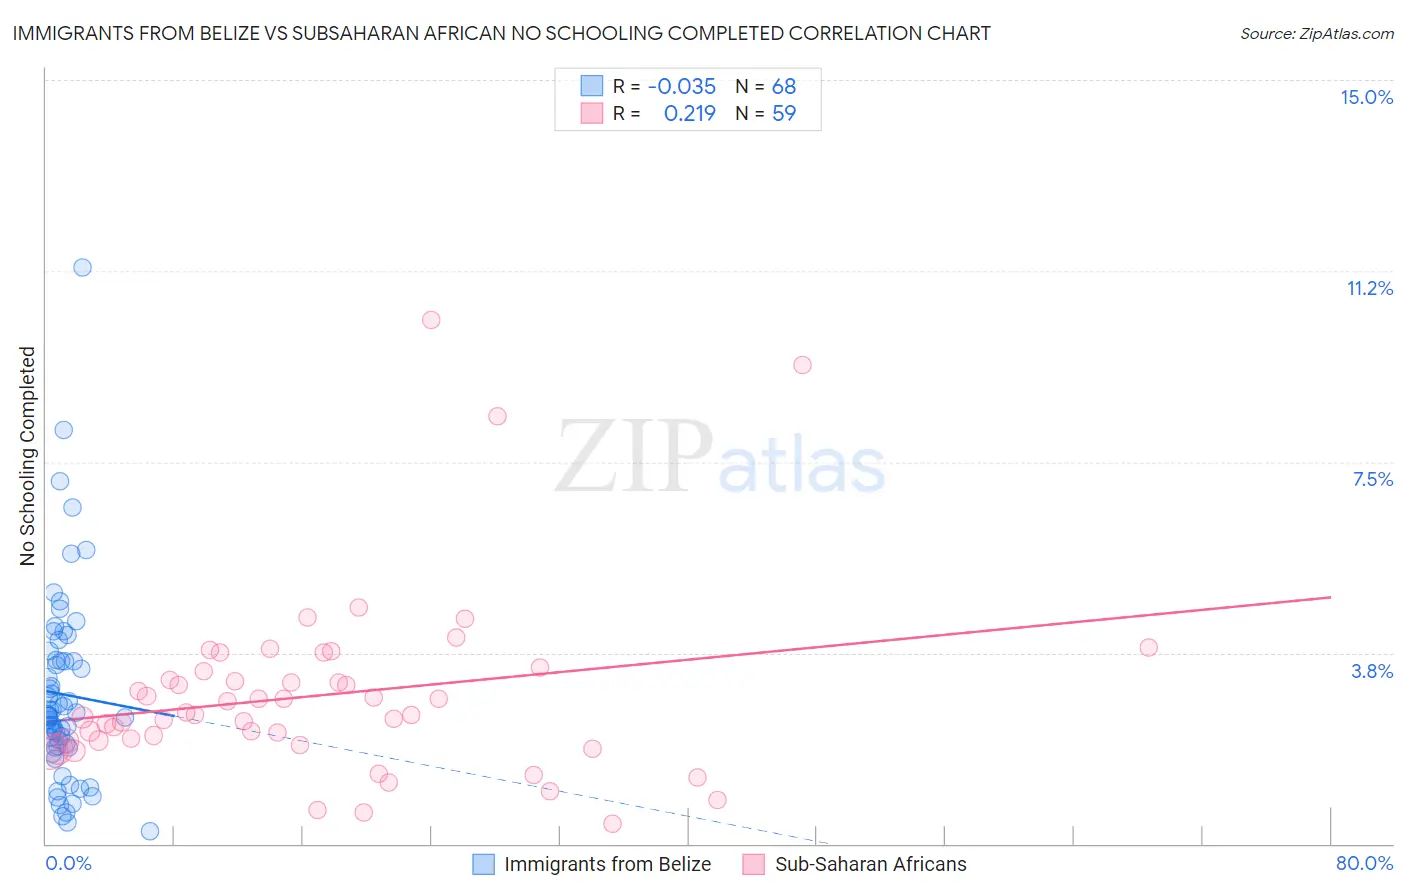 Immigrants from Belize vs Subsaharan African No Schooling Completed